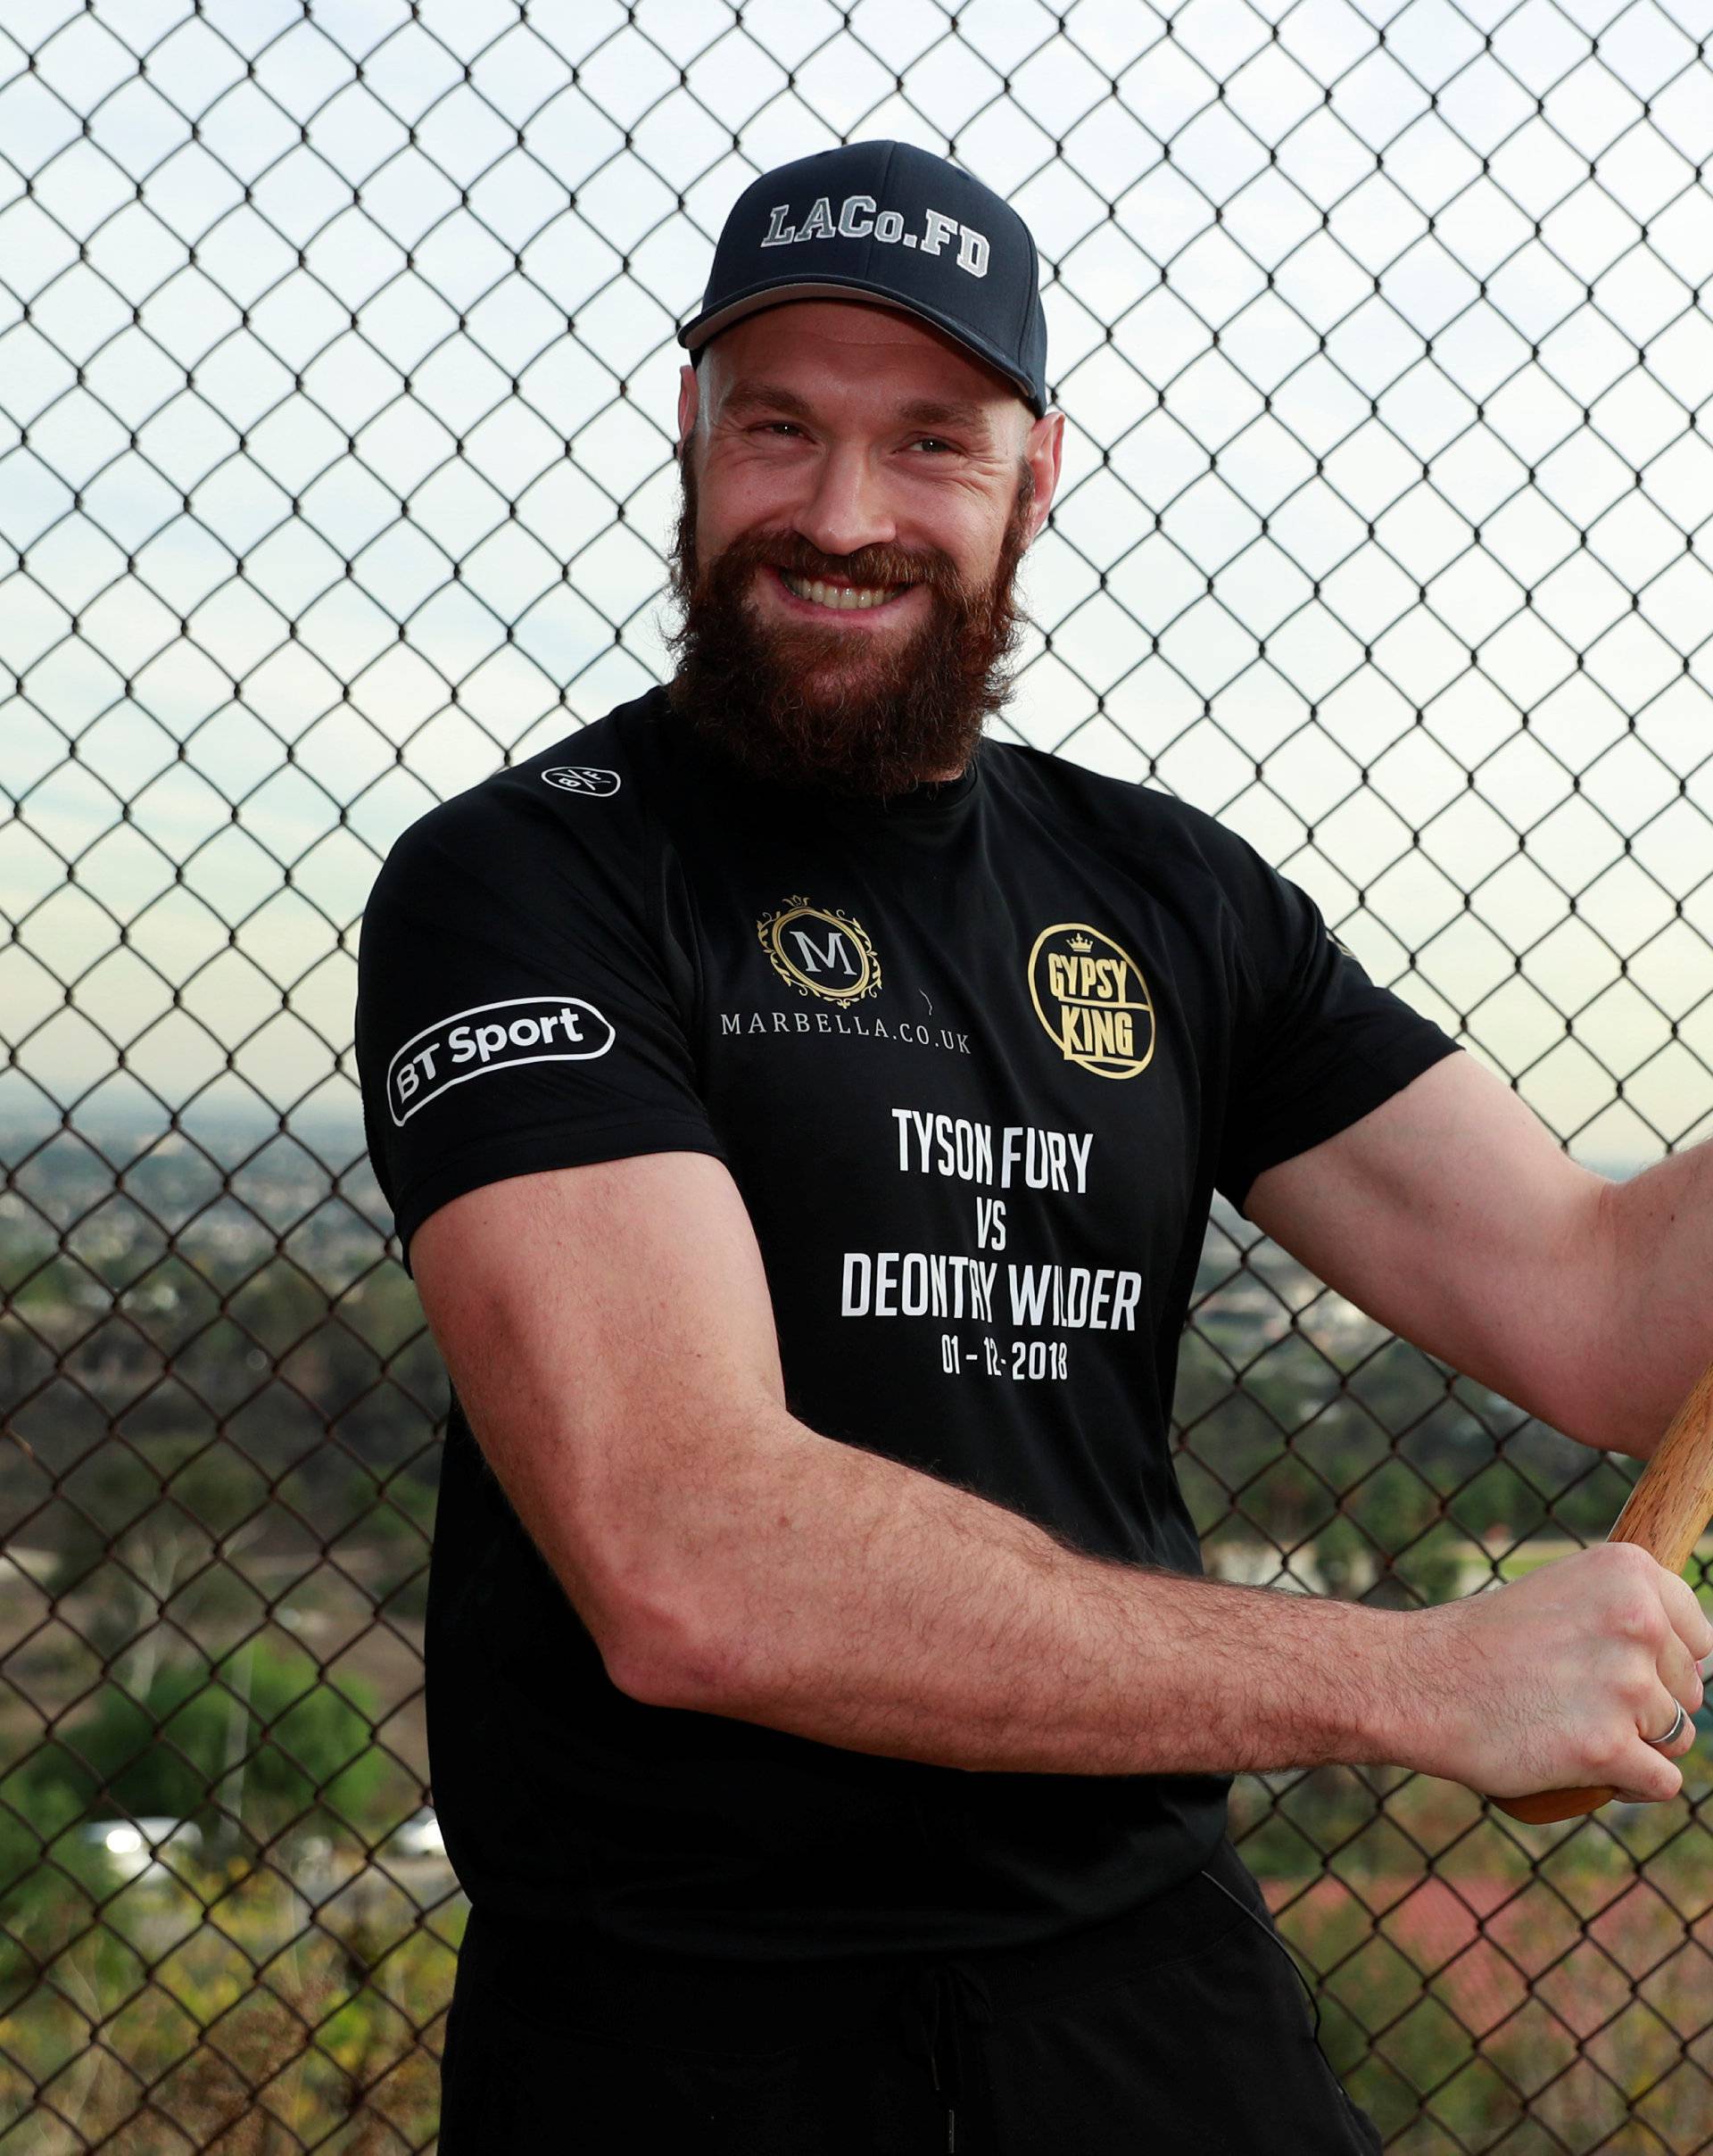 Tyson Fury presents tickets to LA firefighters ahead of his WBC heavyweight title fight with Deontay Wilder